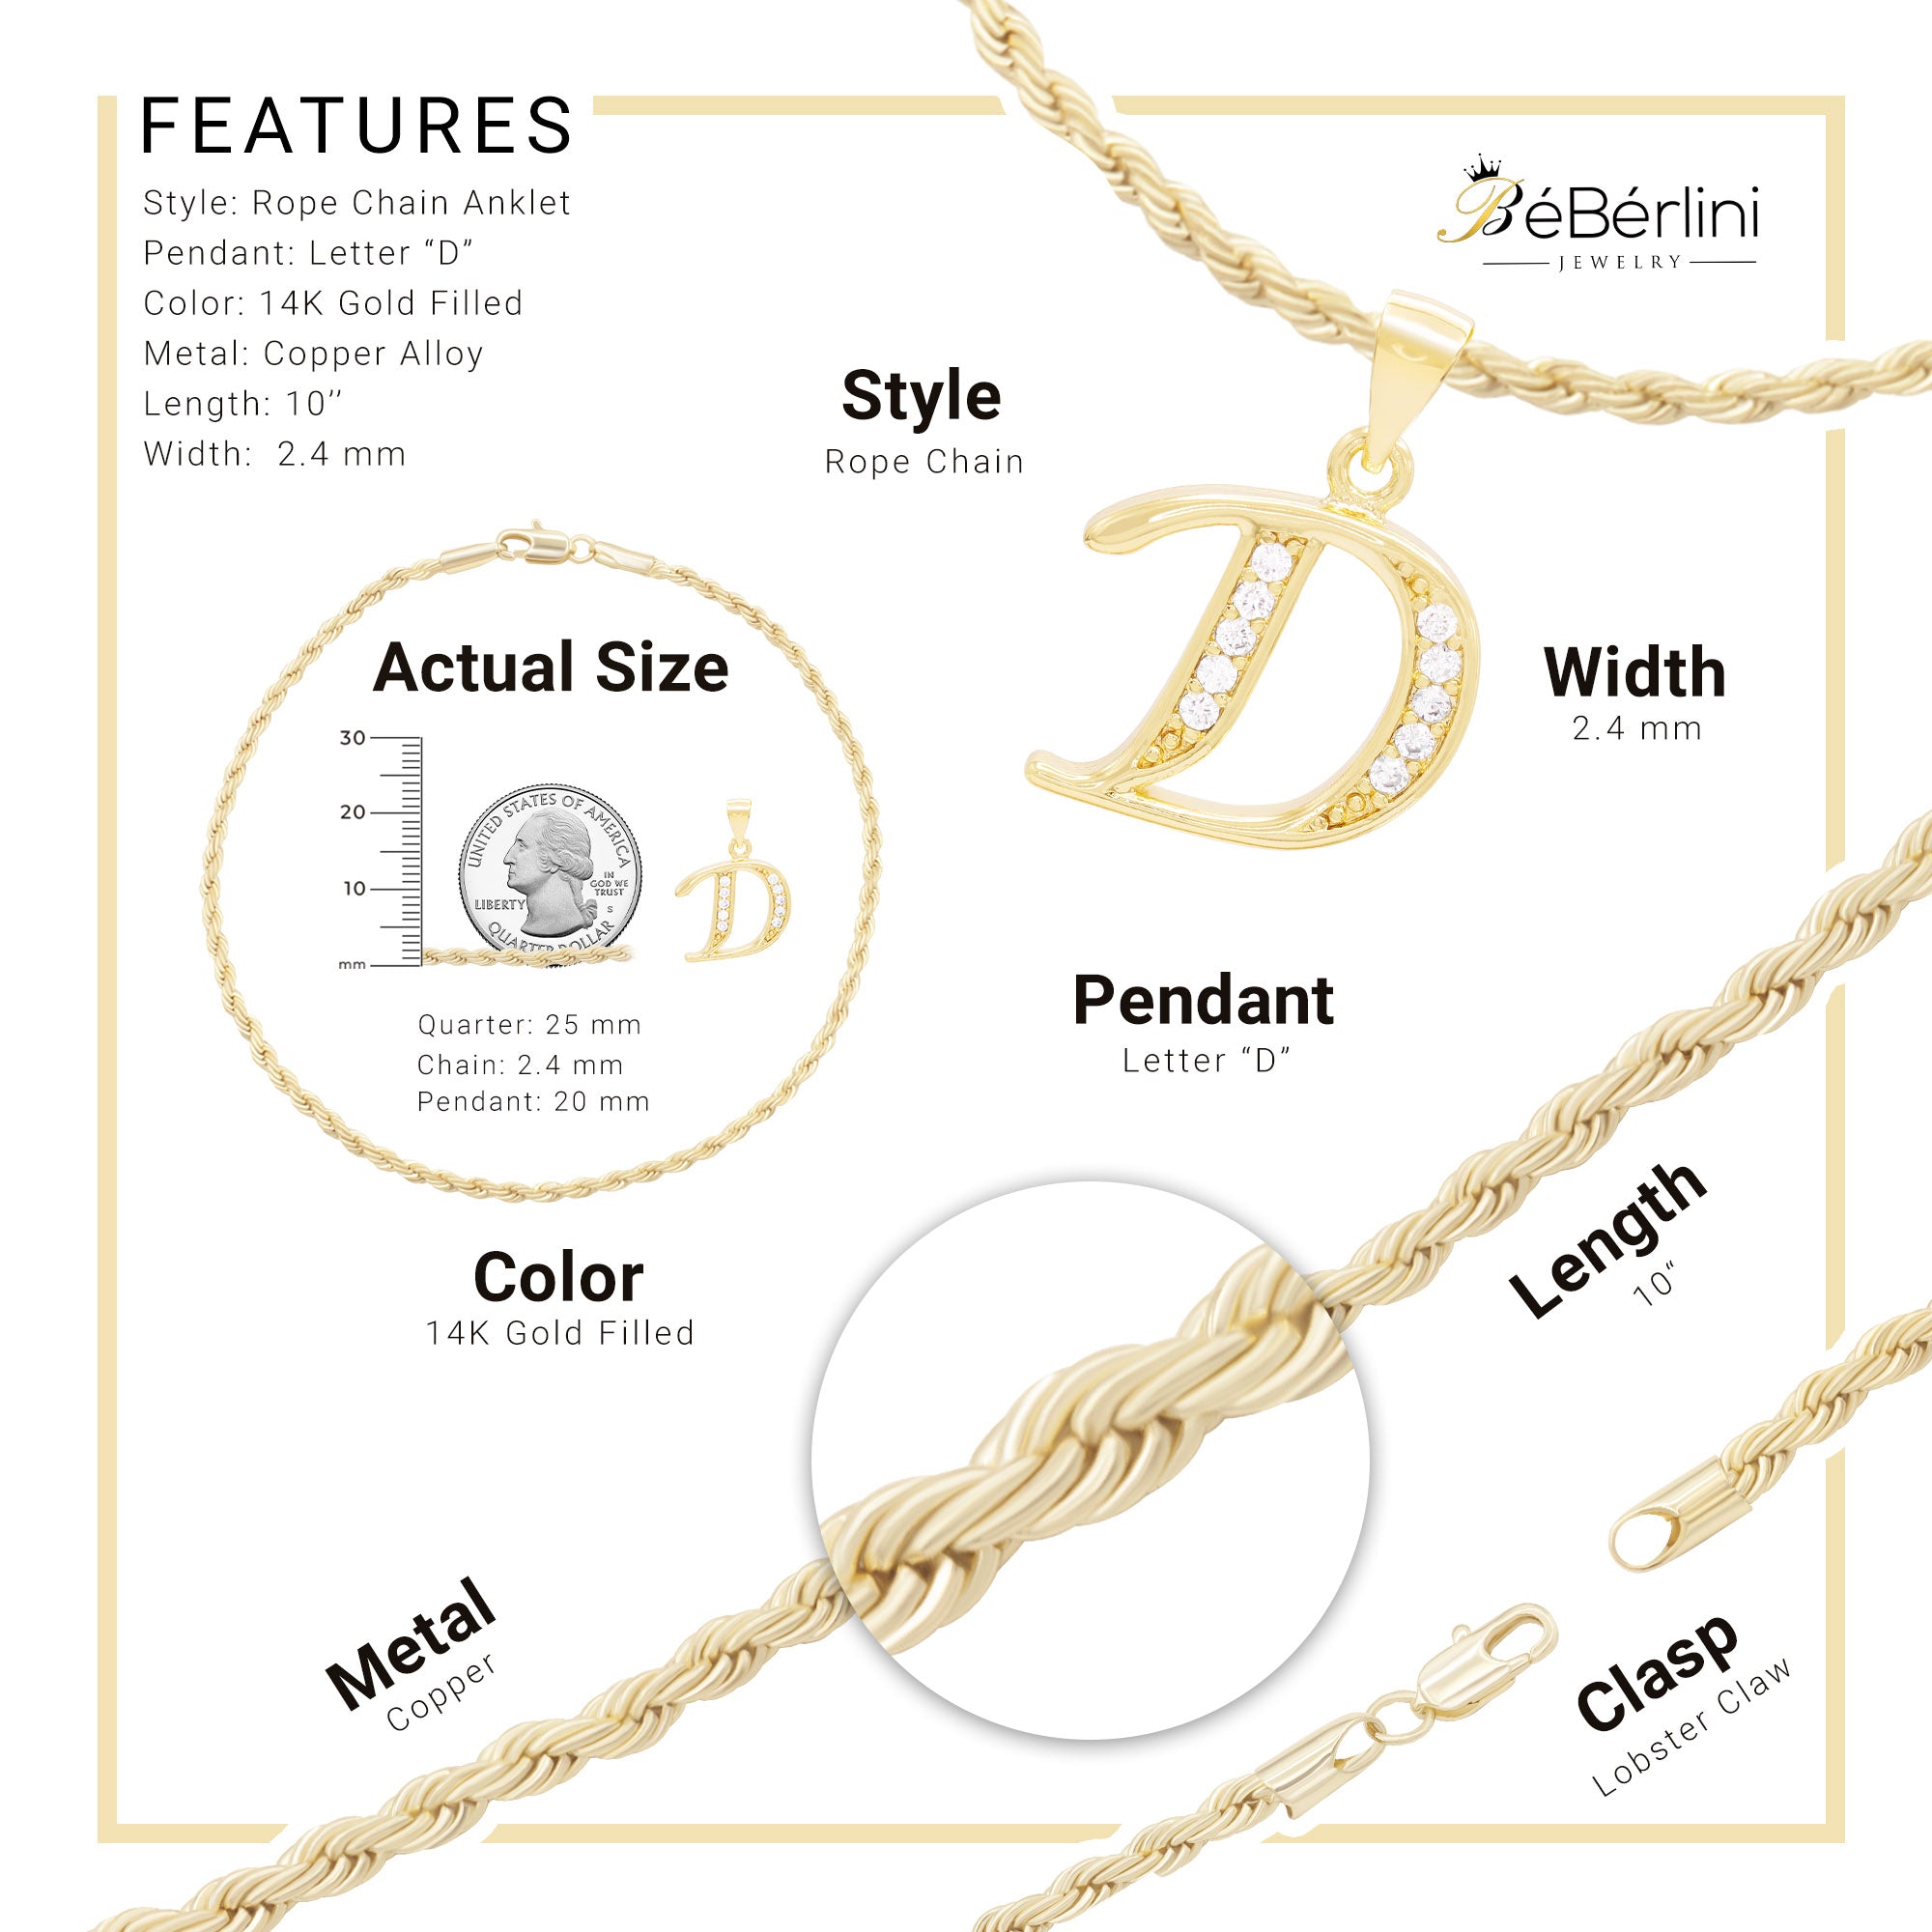 Beberlini CZ Heart Pendant 14K Gold Filled Charm Necklace Set Cuban Link Box Rope Chain Lobster Clasp Fashion Cubic Zirconia Jewelry Gift Women Girls